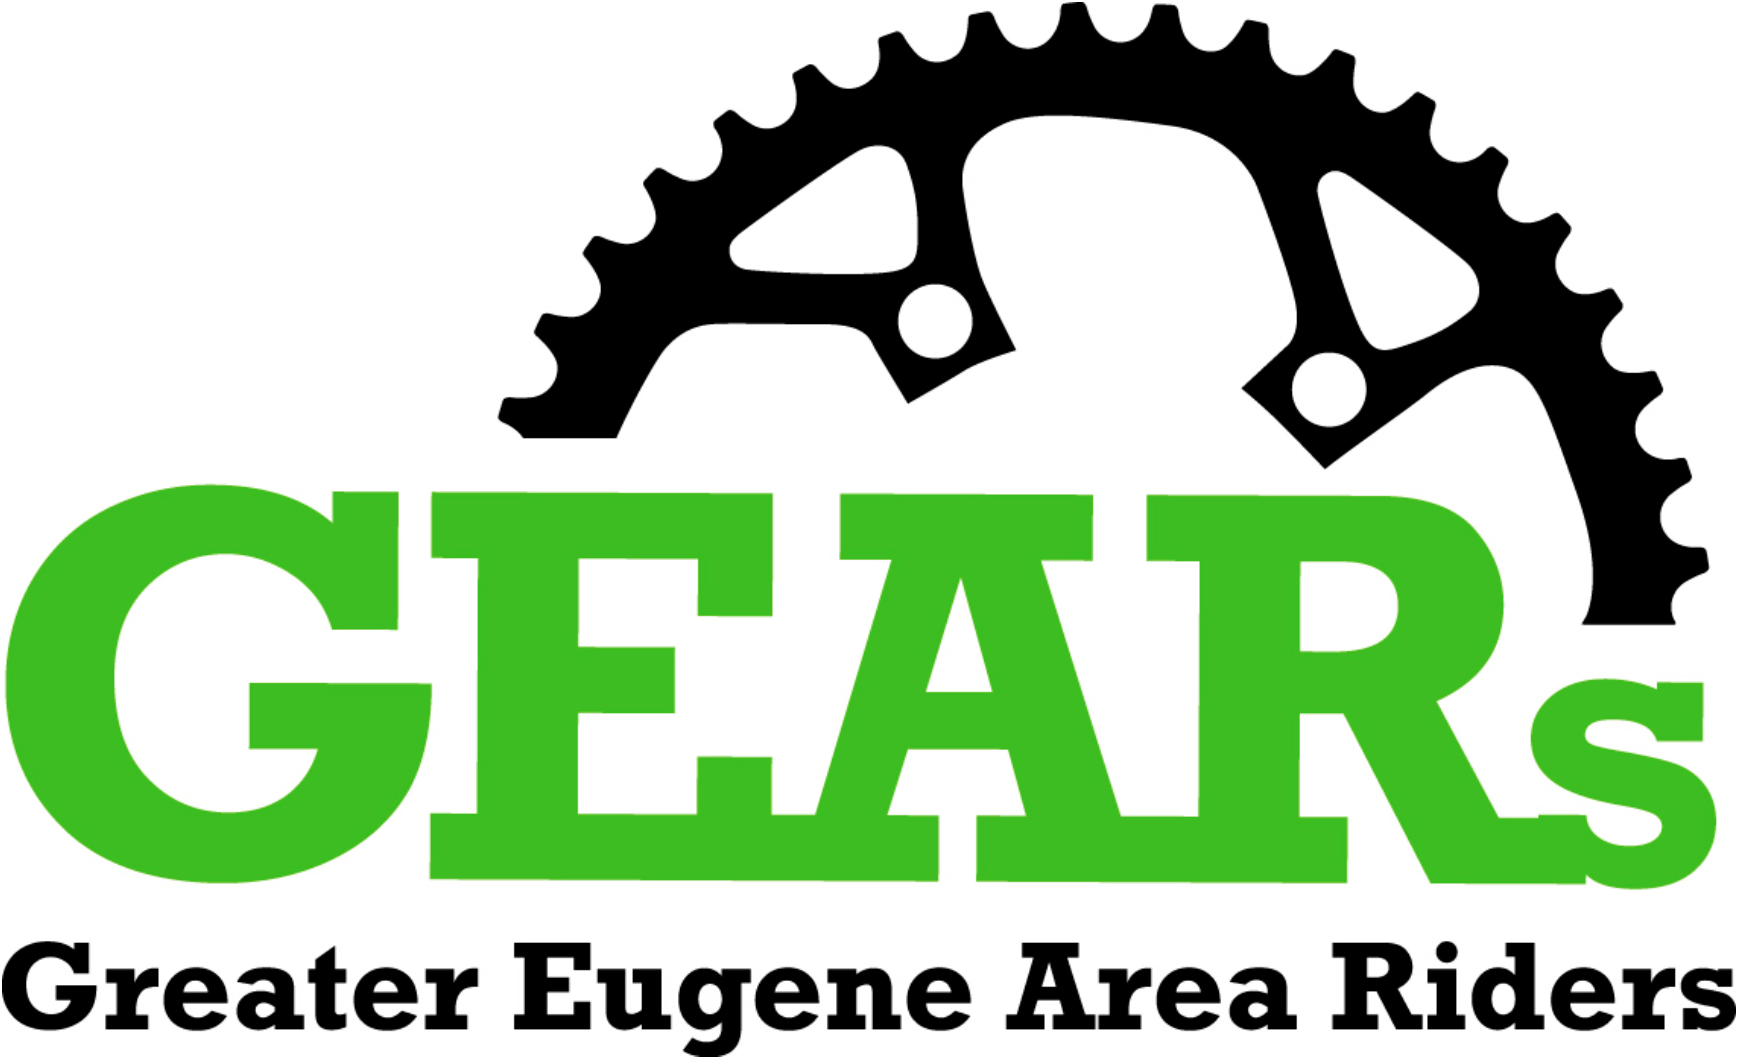 Greater Eugene Area Riders